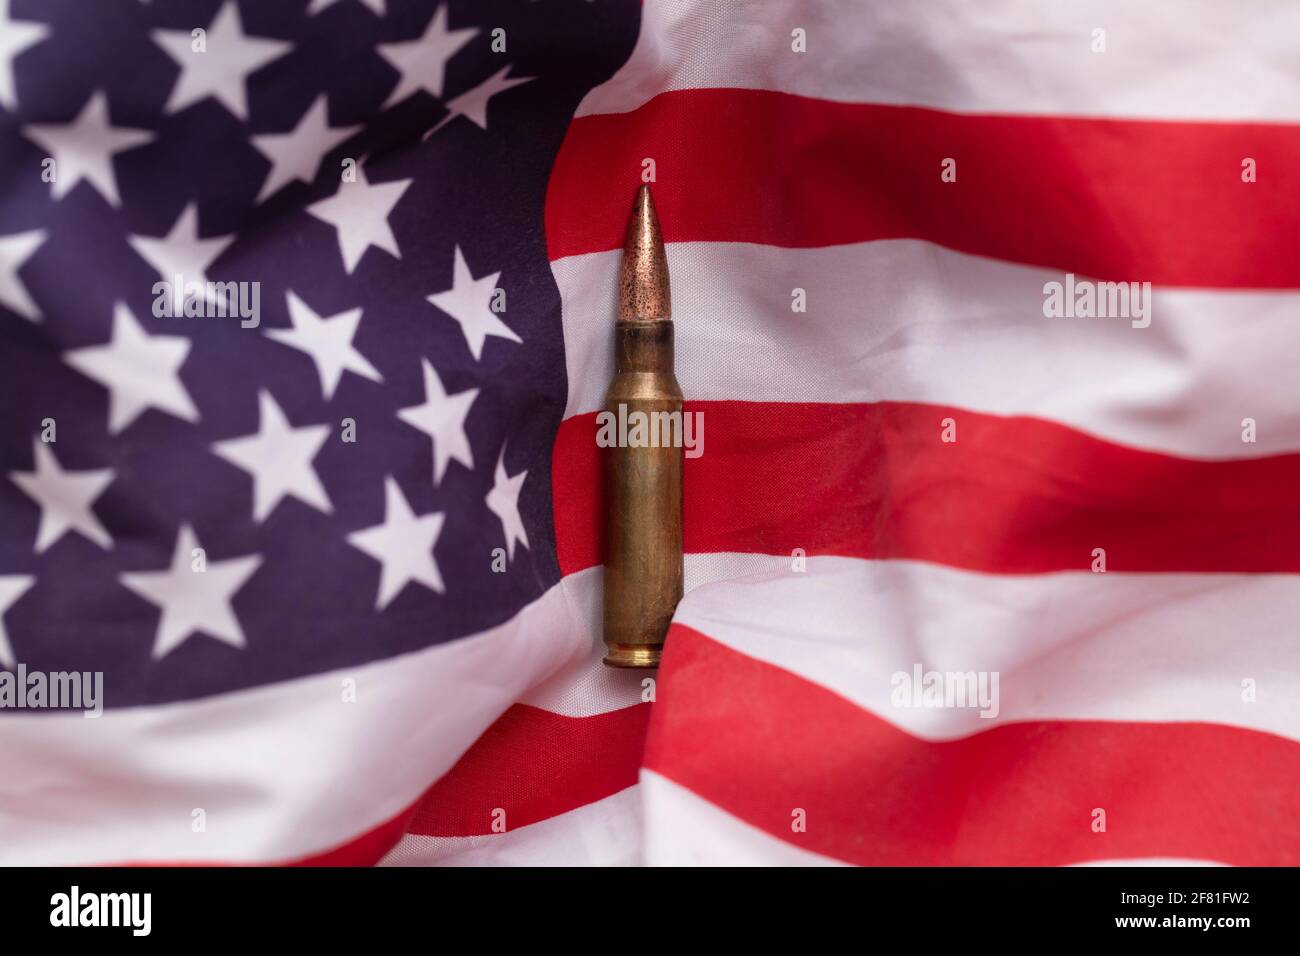 Bullet ammunition on a United states stars and stripes flag Stock Photo